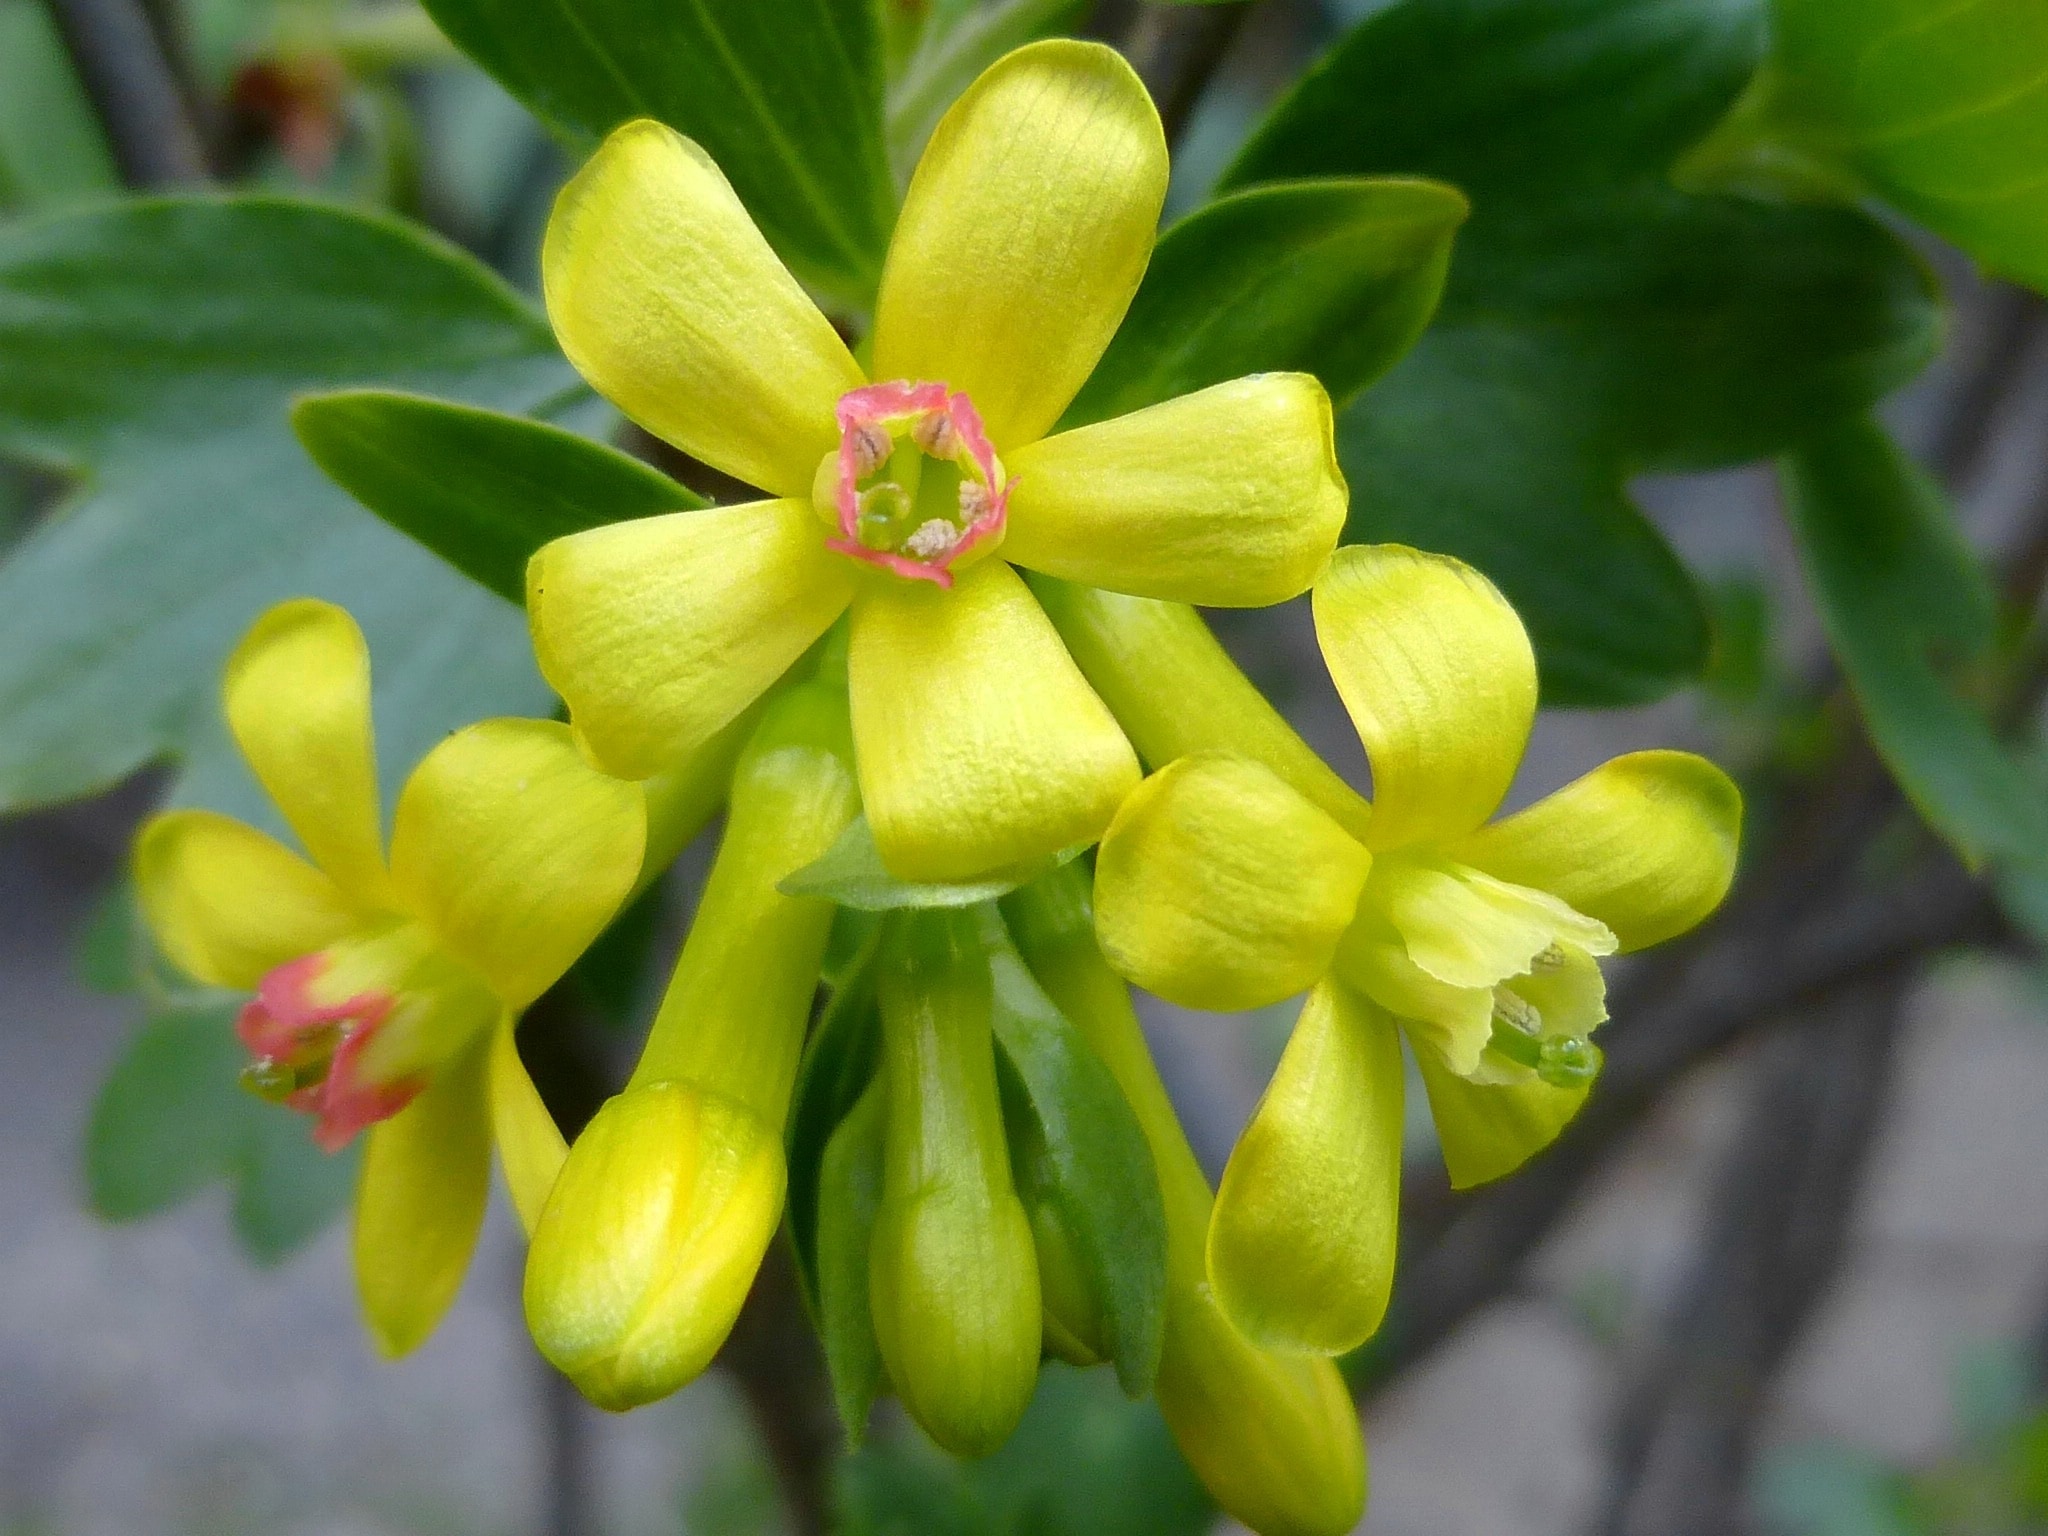 yellow cluster 5 petaled flower